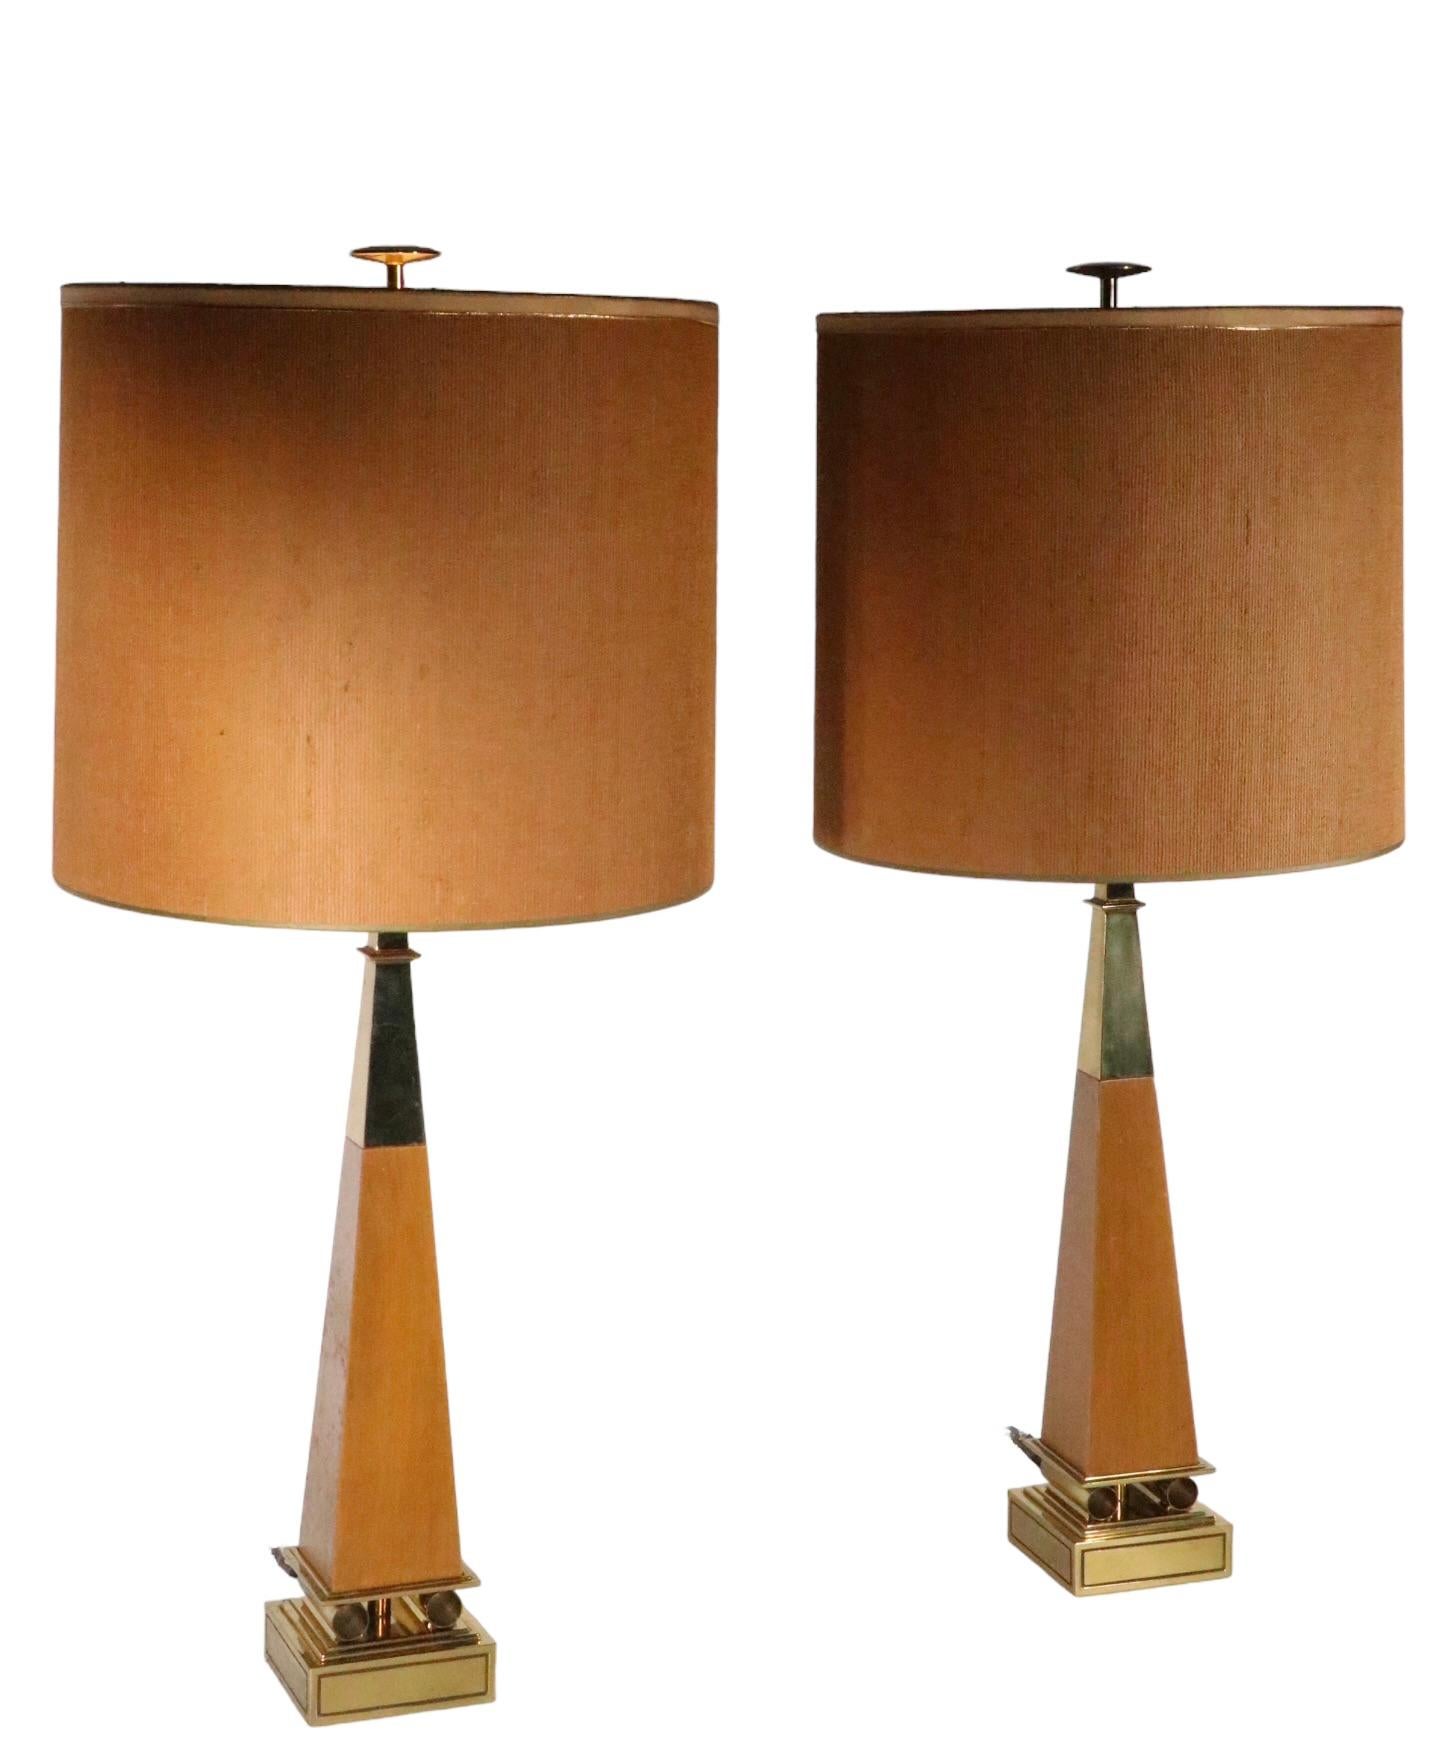 Pair Hollywood Regency Obelisk Table Lamps by Stiffel Att. to Parzinger For Sale 10